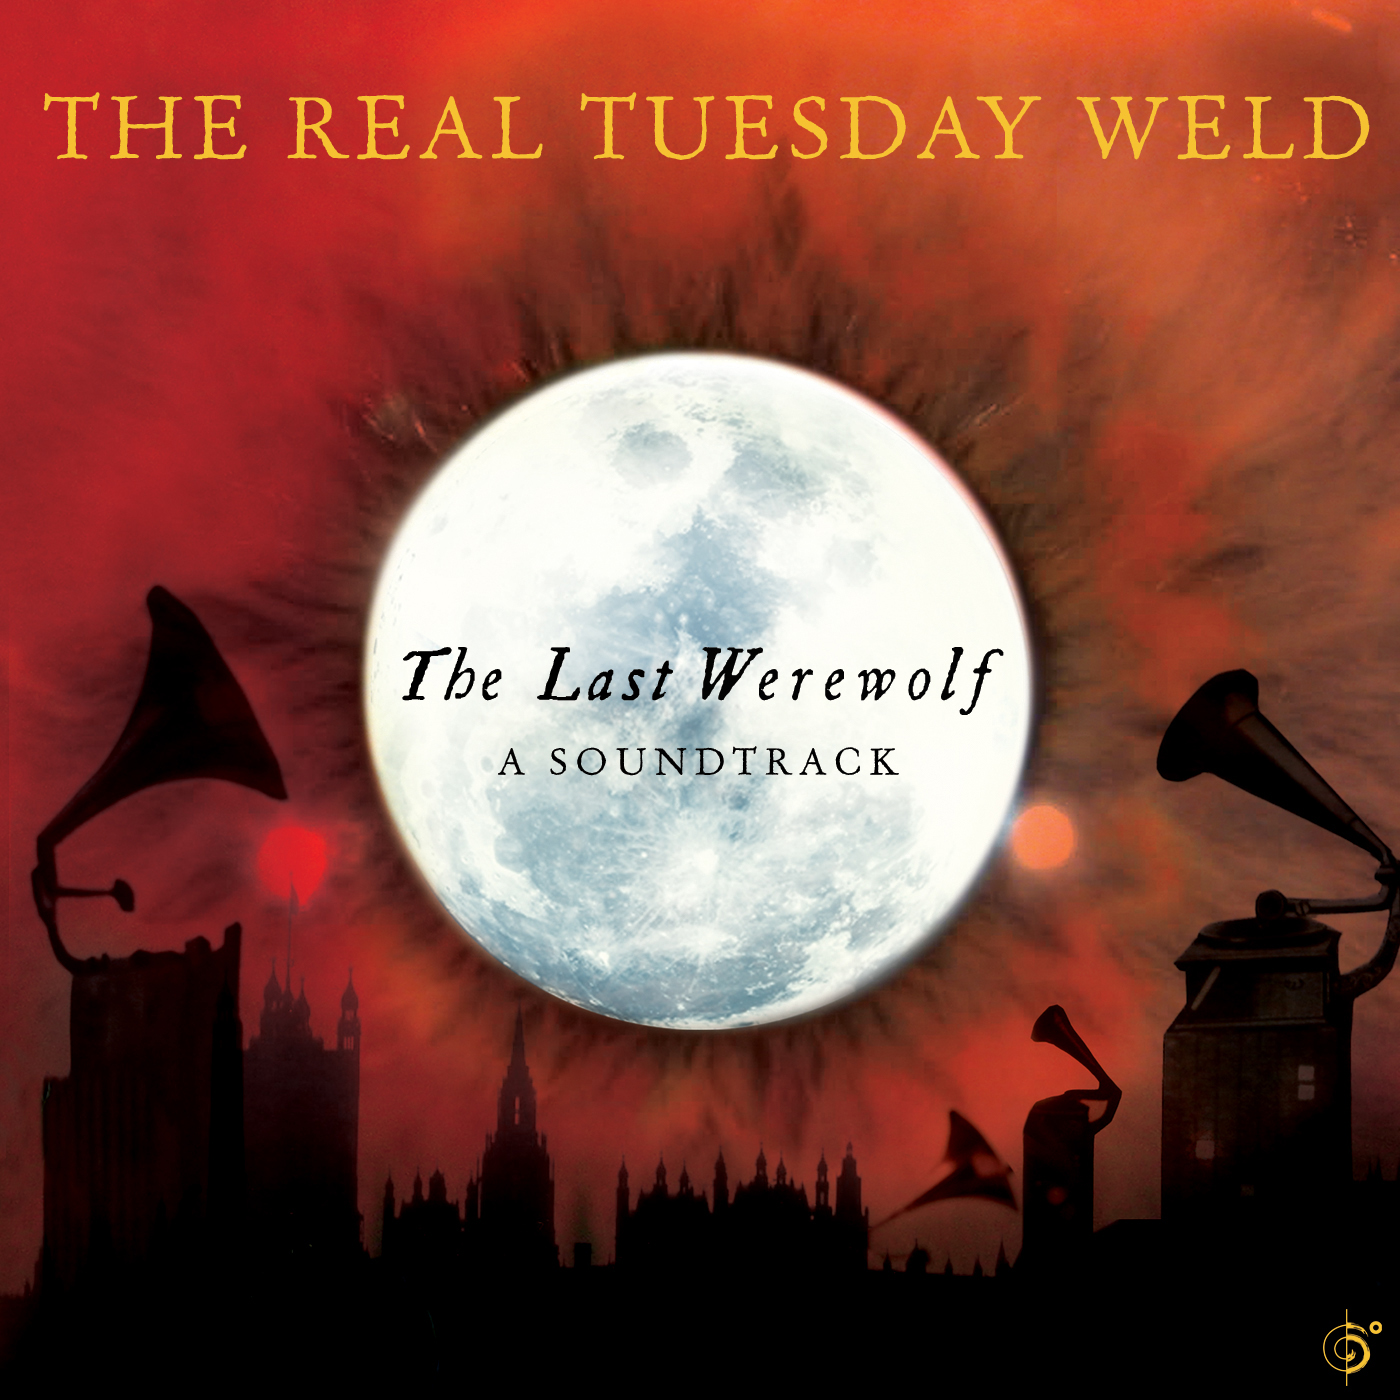 The Real Tuesday Weld - Six Degrees Records.